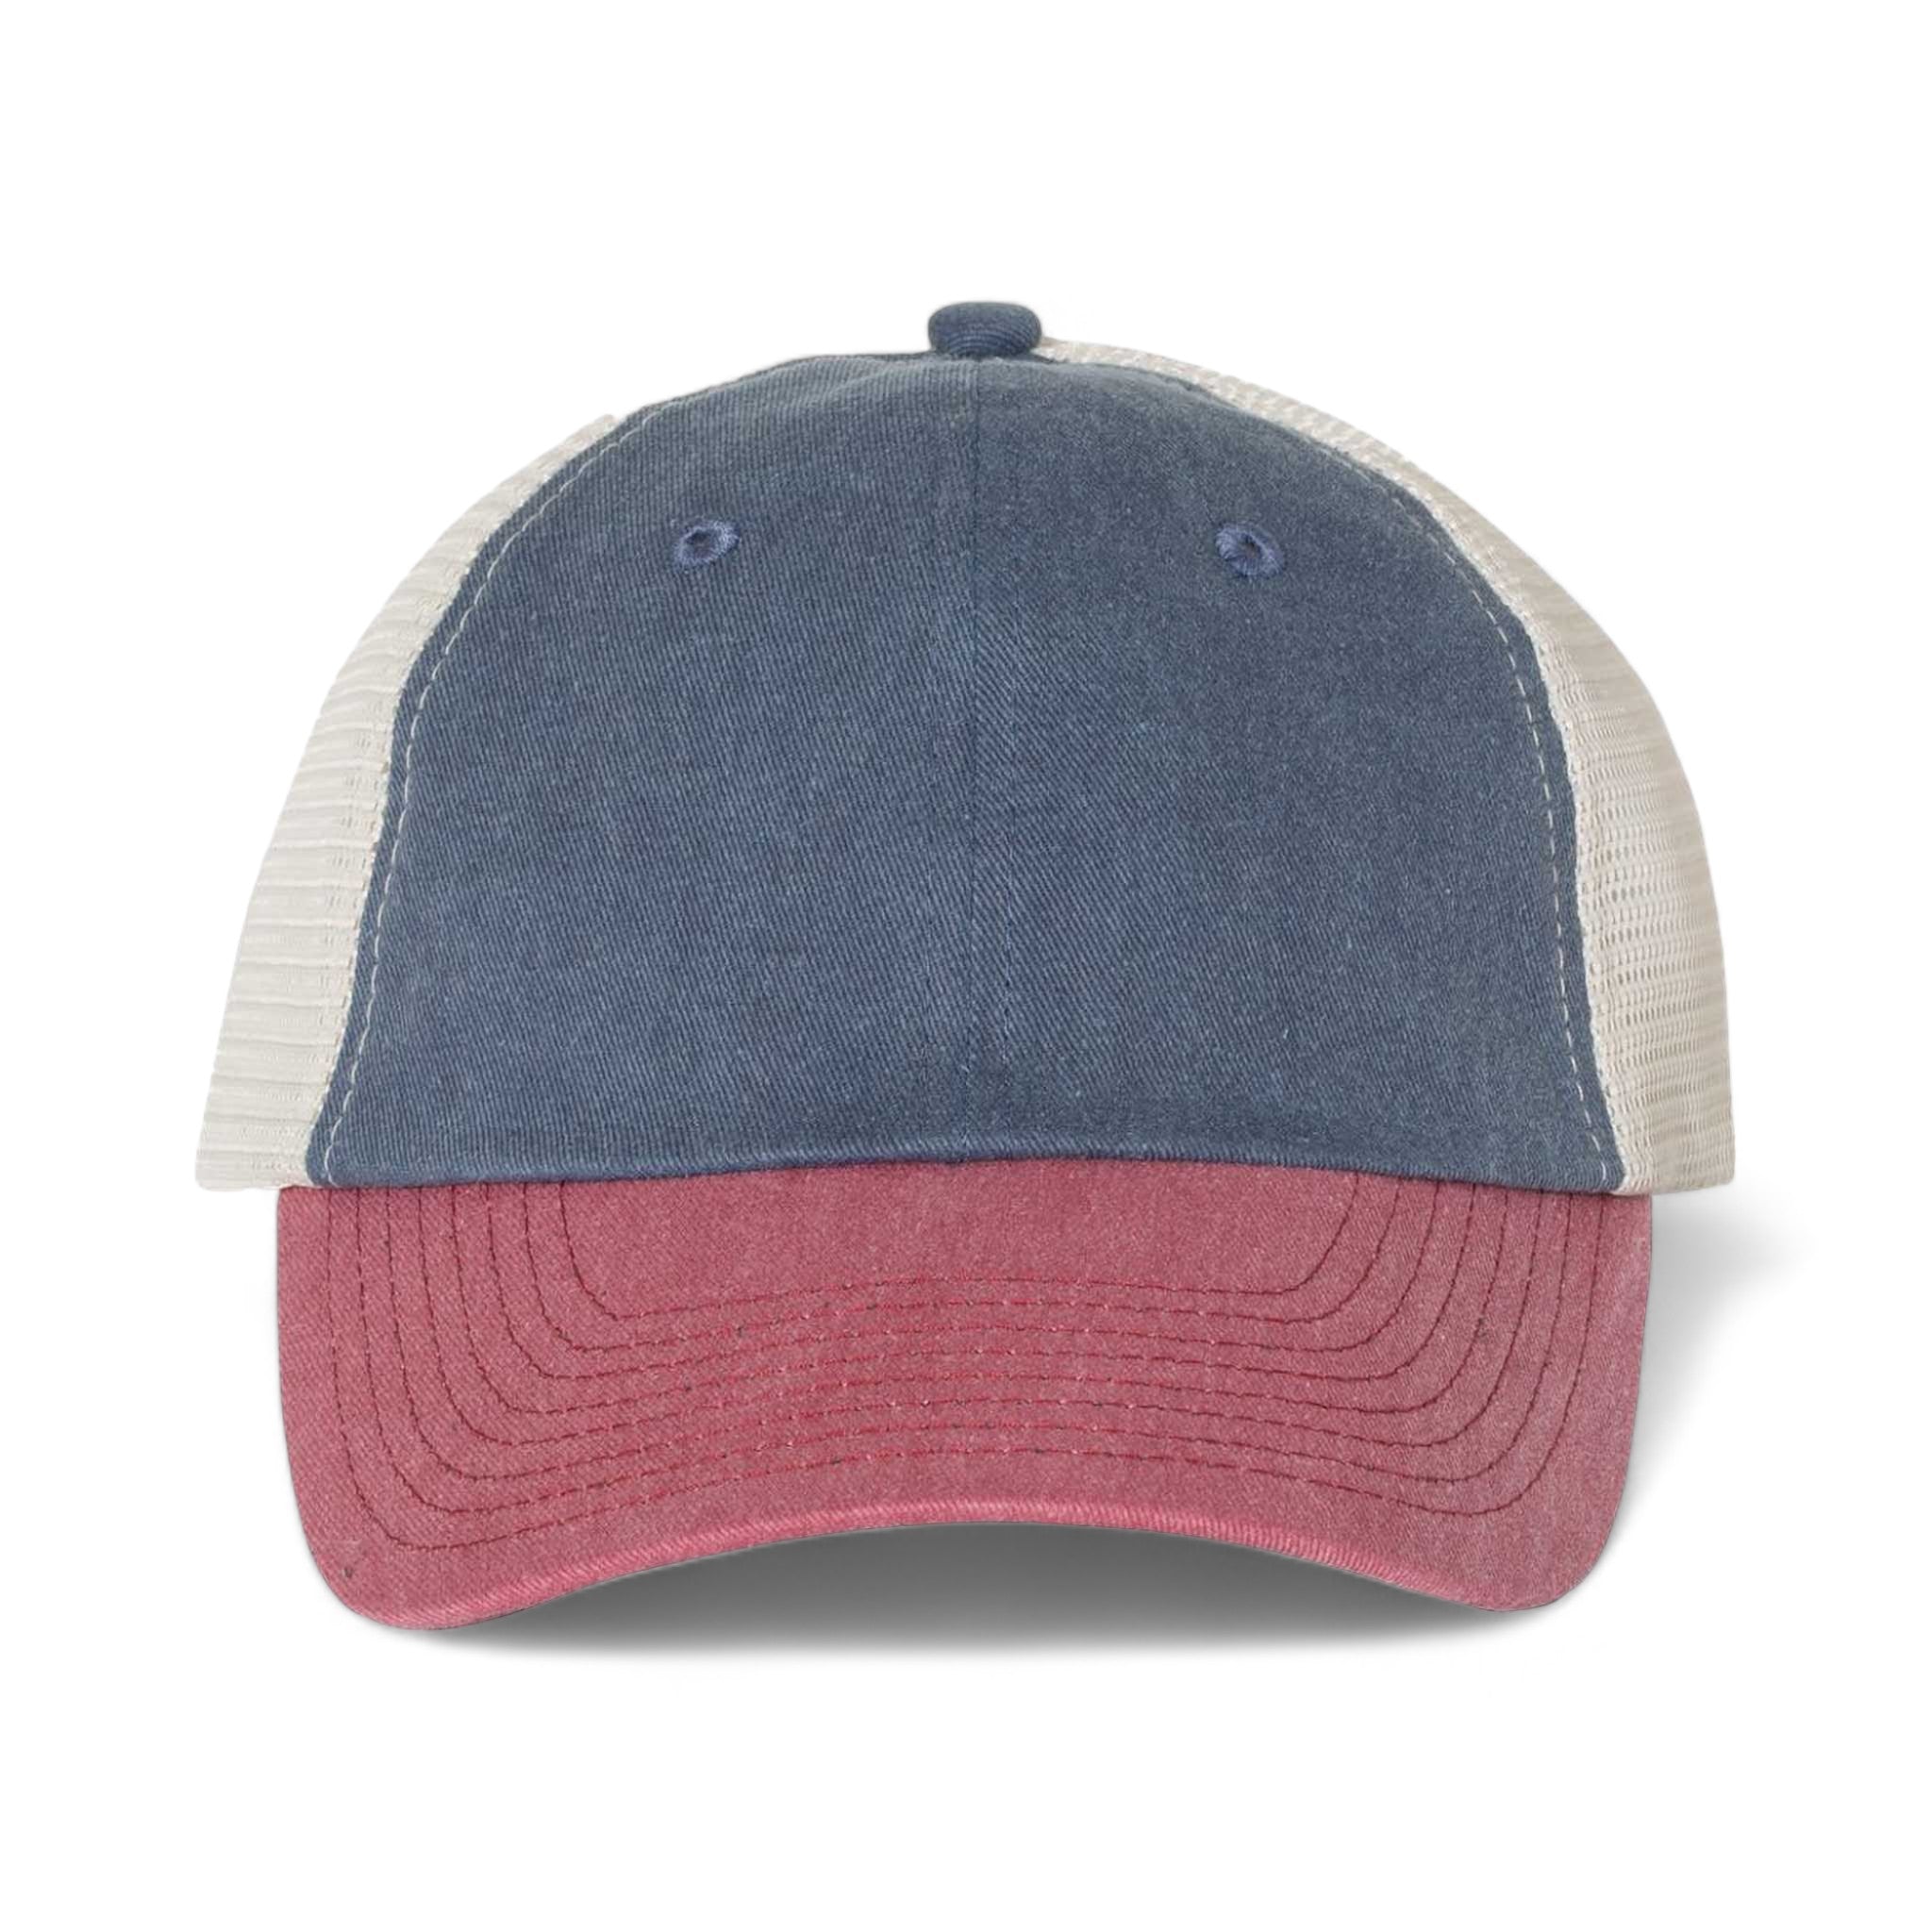 Front view of Sportsman SP510 custom hat in navy, cardinal and stone